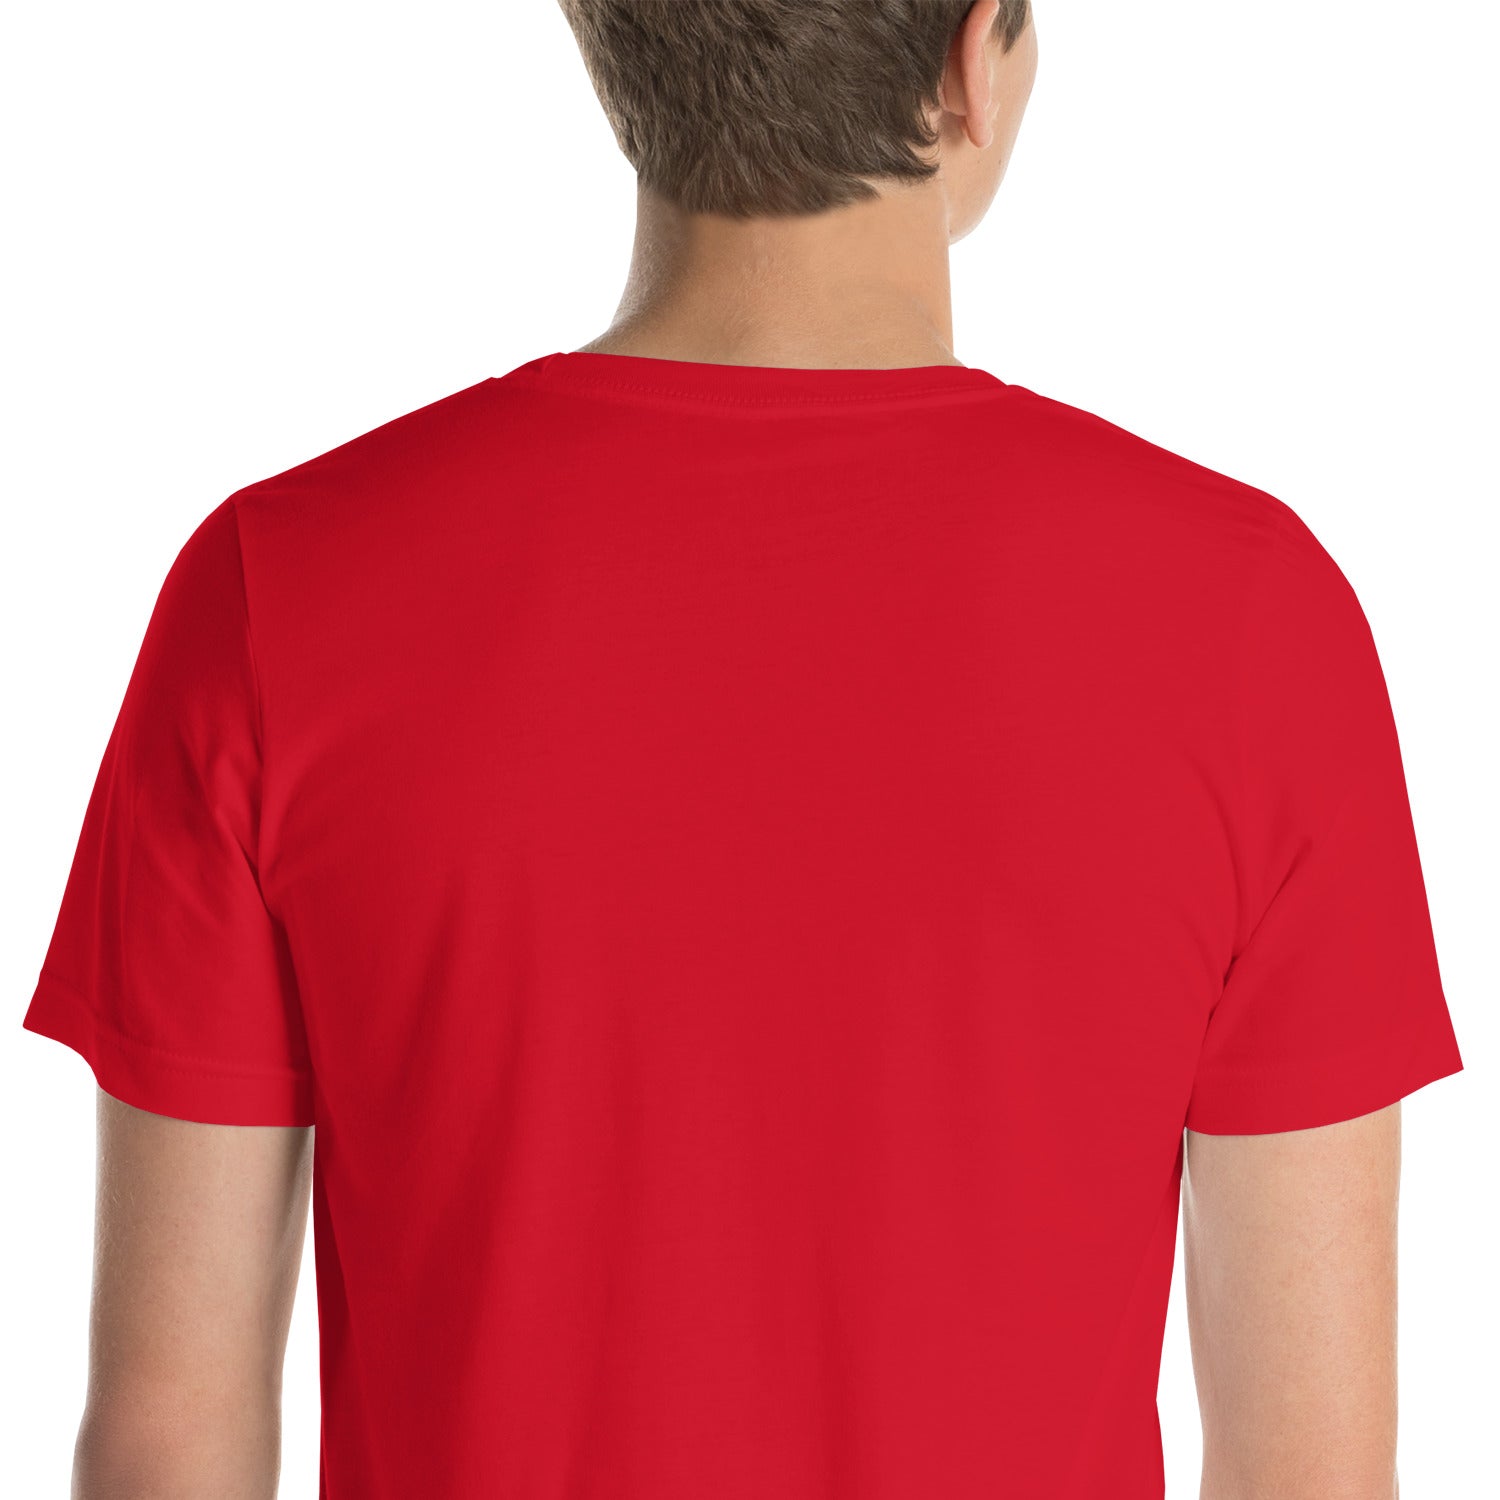 Disc Golf is for Everyone Groovy t-shirt - red back